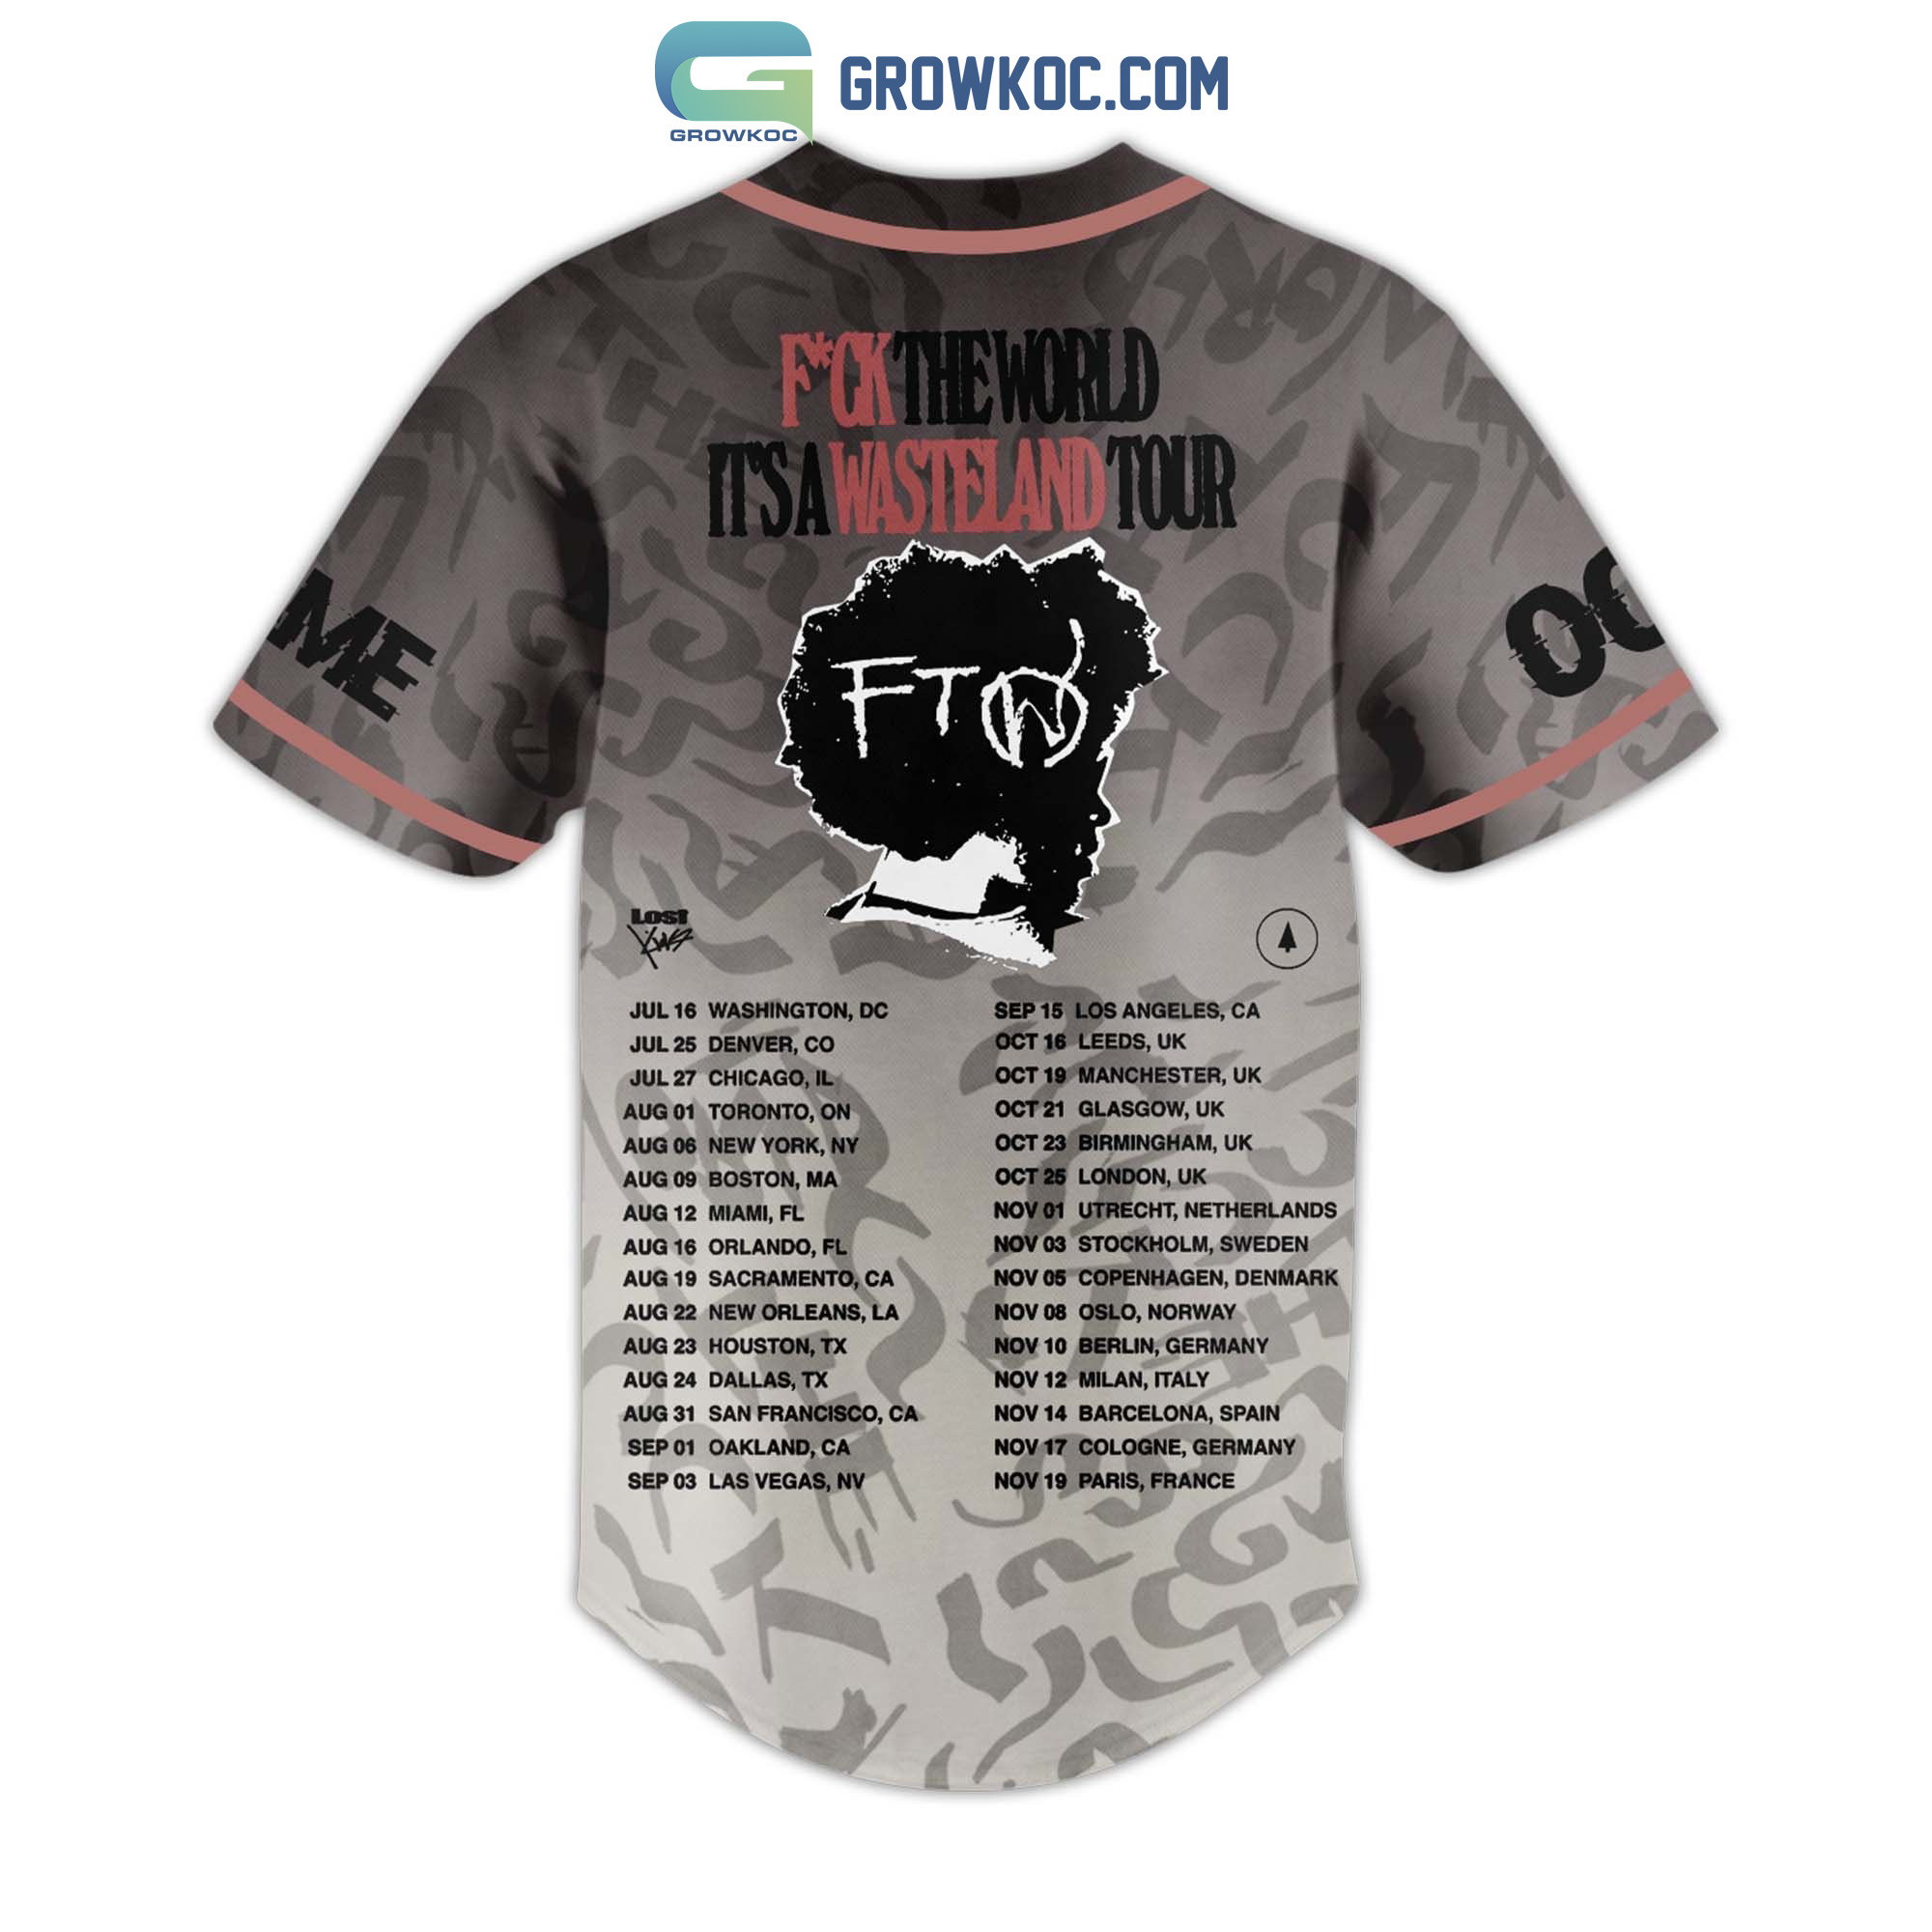 Brent Faiyaz F*ck The World It's A Wasterland Tour Personalized Baseball Jersey